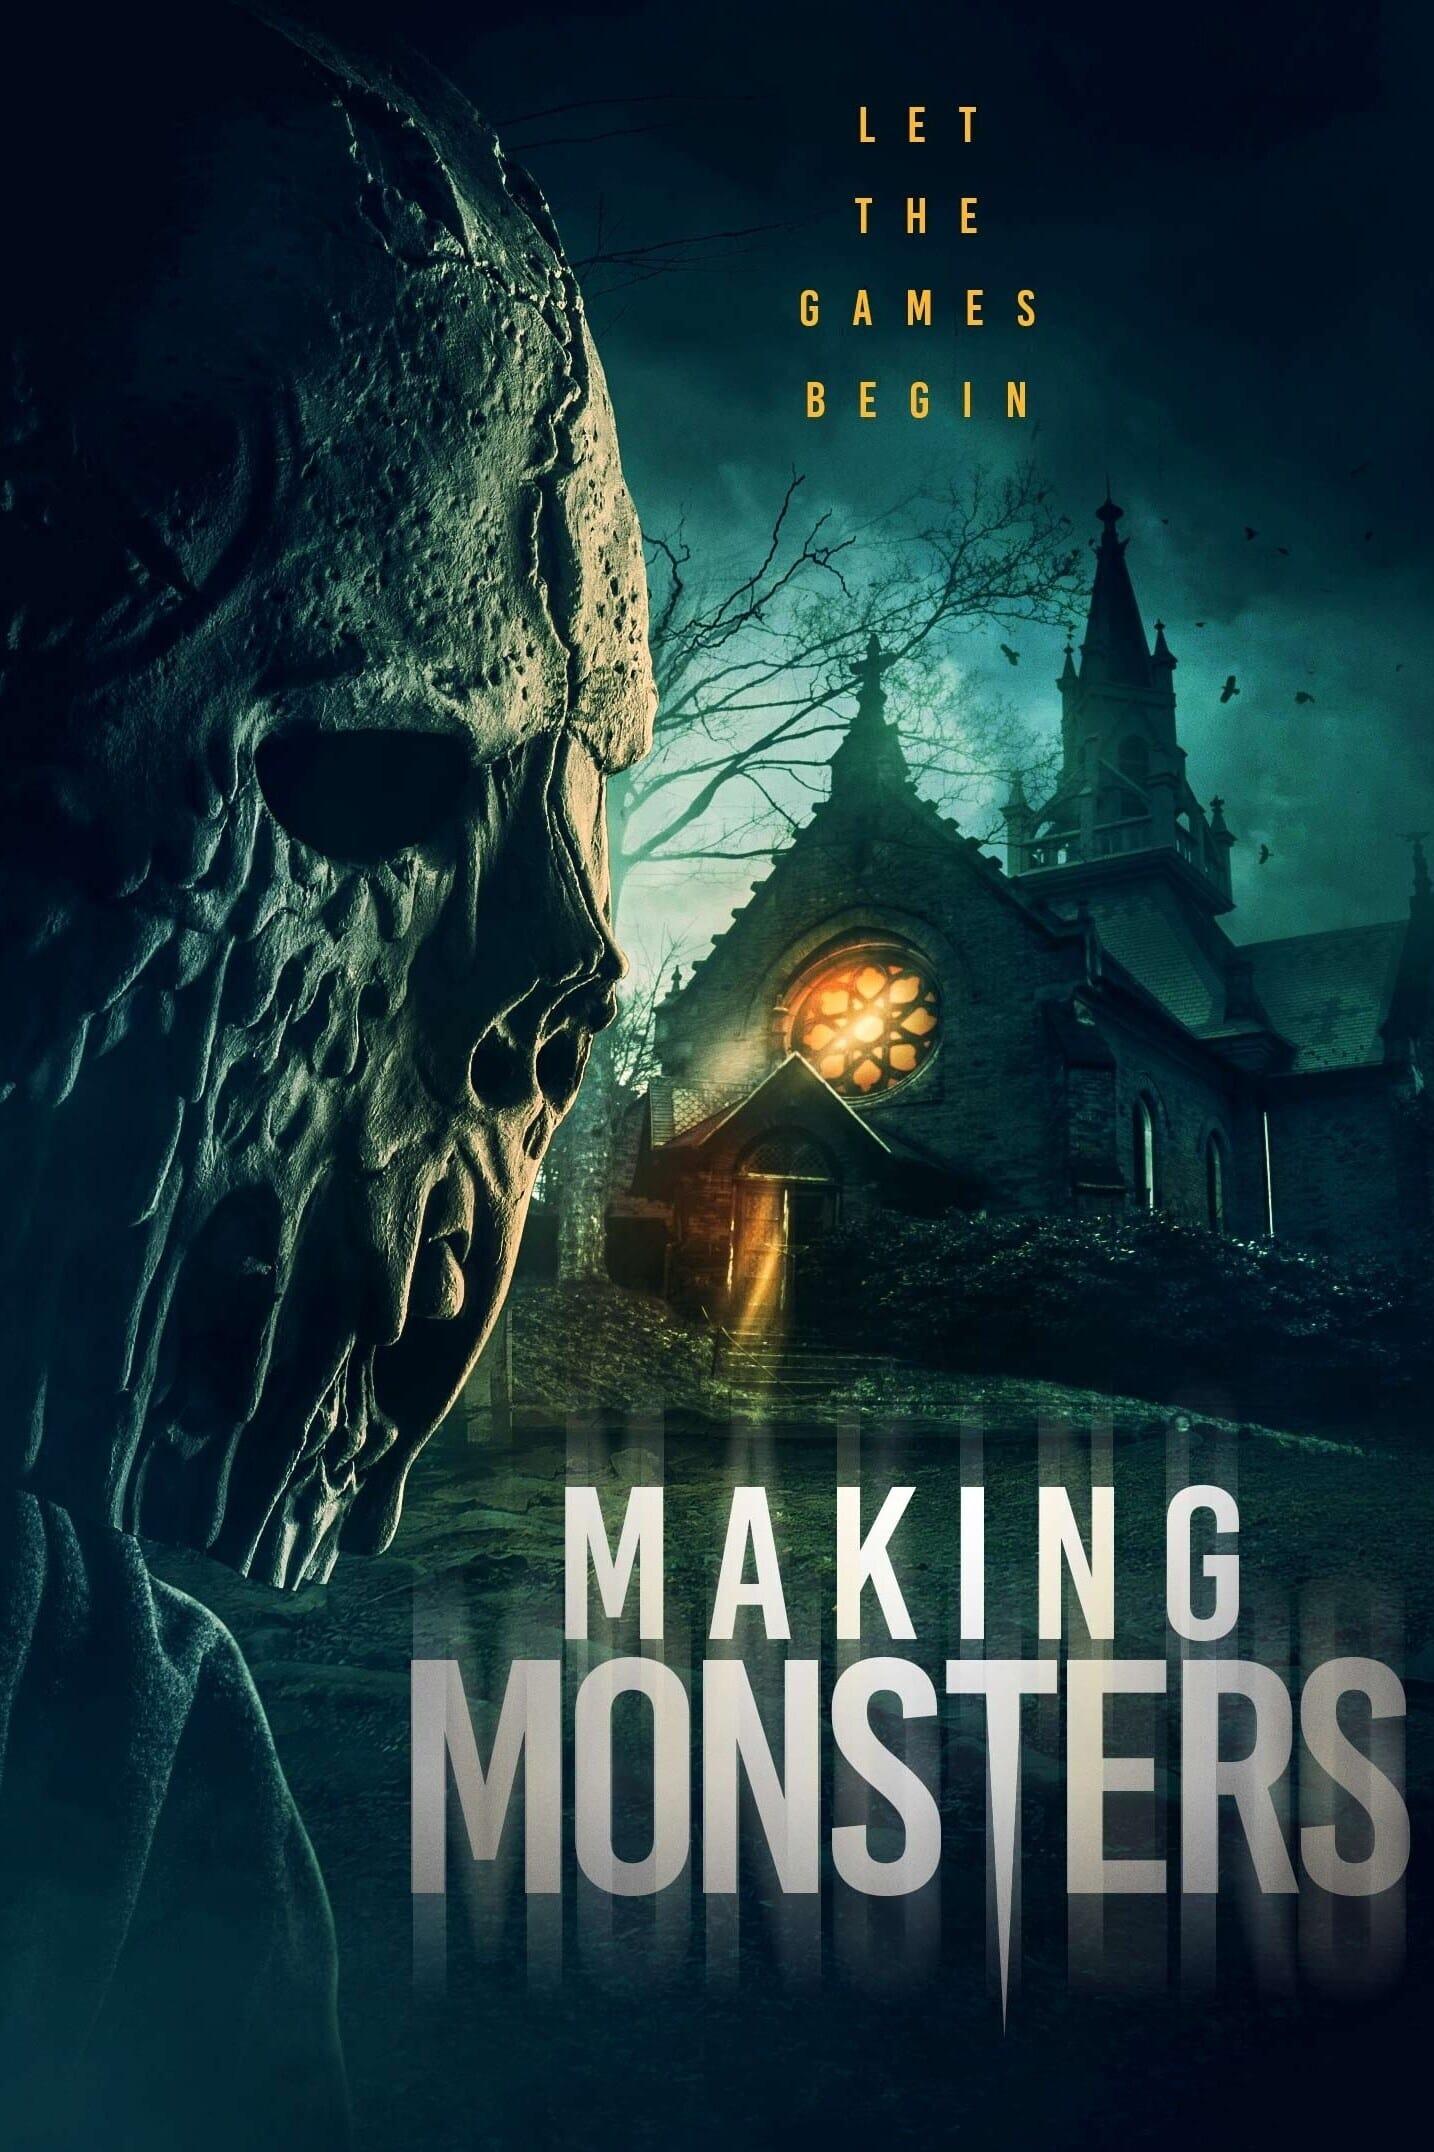 Making Monsters poster